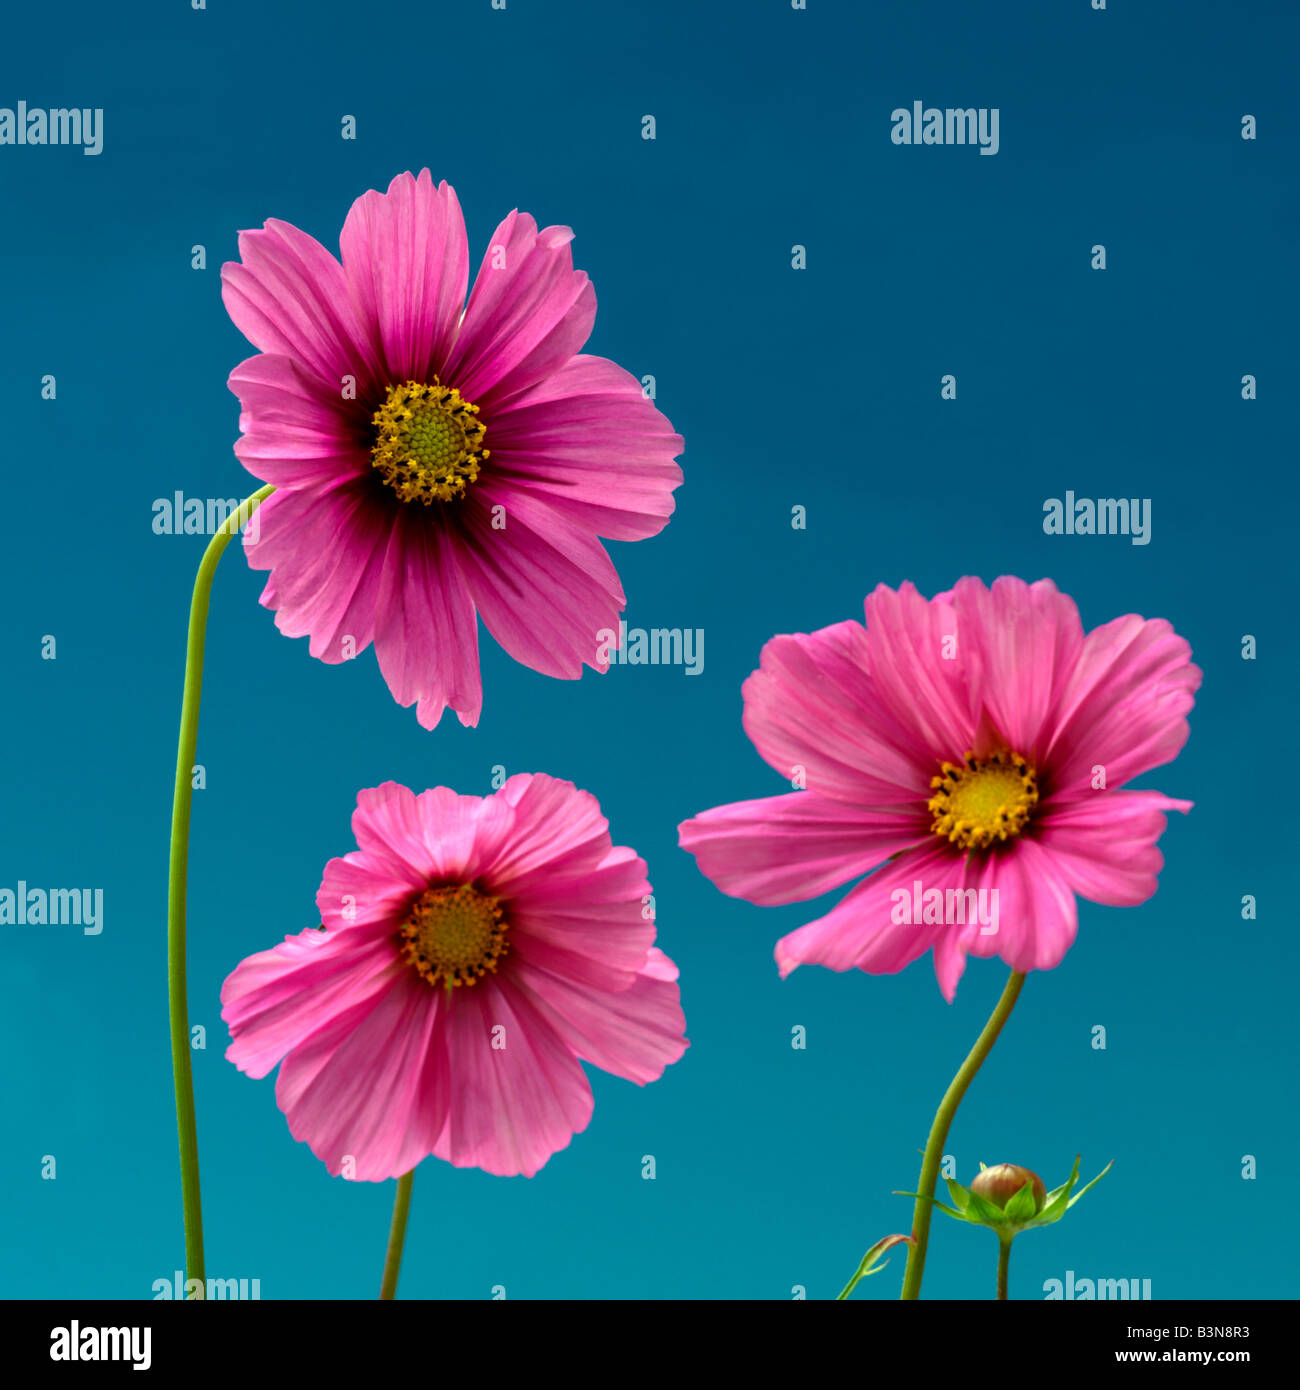 Three pink flowers on sky blue background Stock Photo